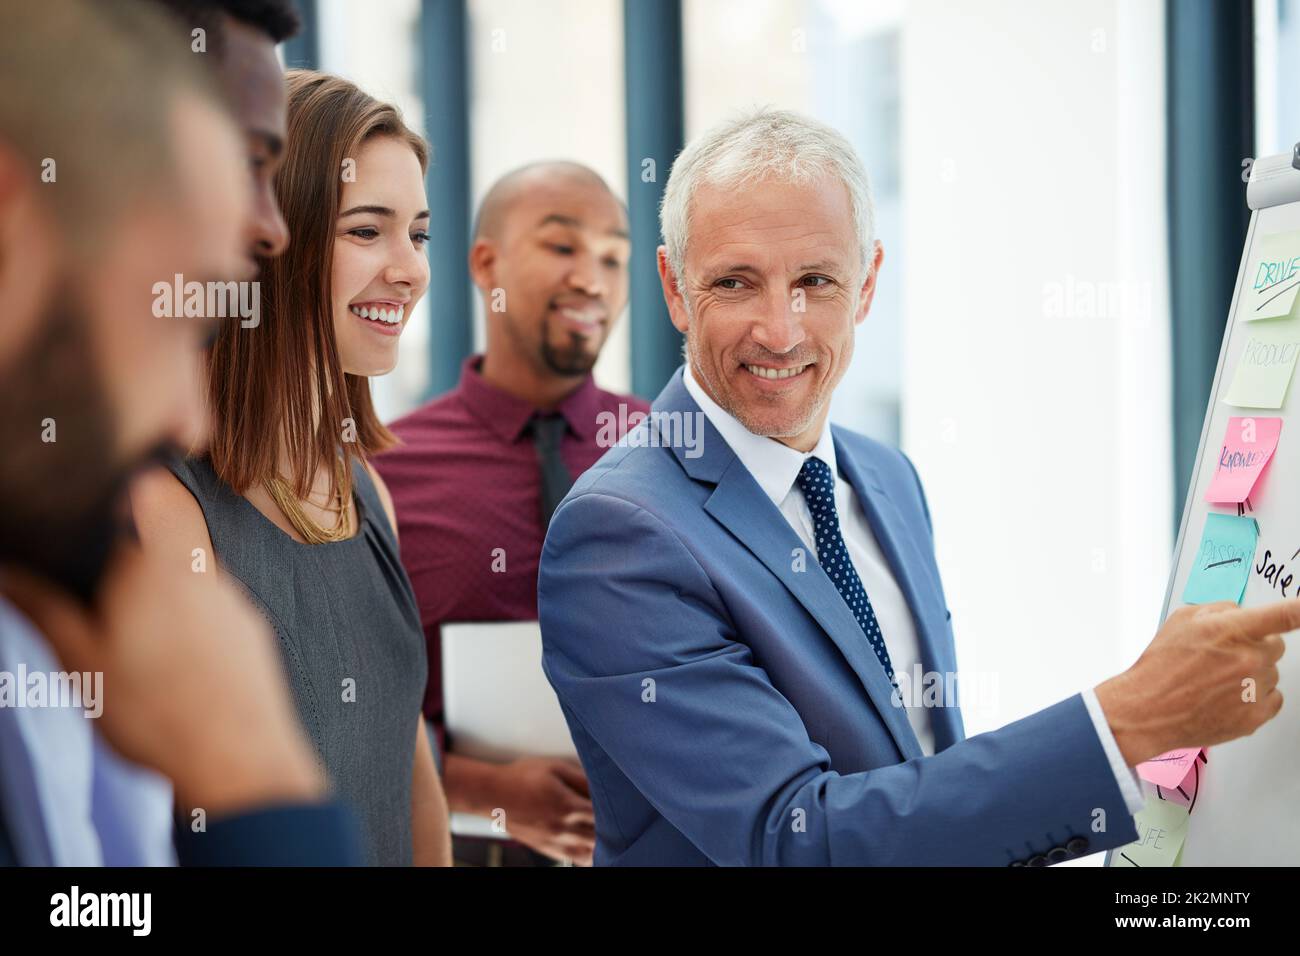 Brainstorming their way to better business. Shot of a group of colleagues working on a project together. Stock Photo